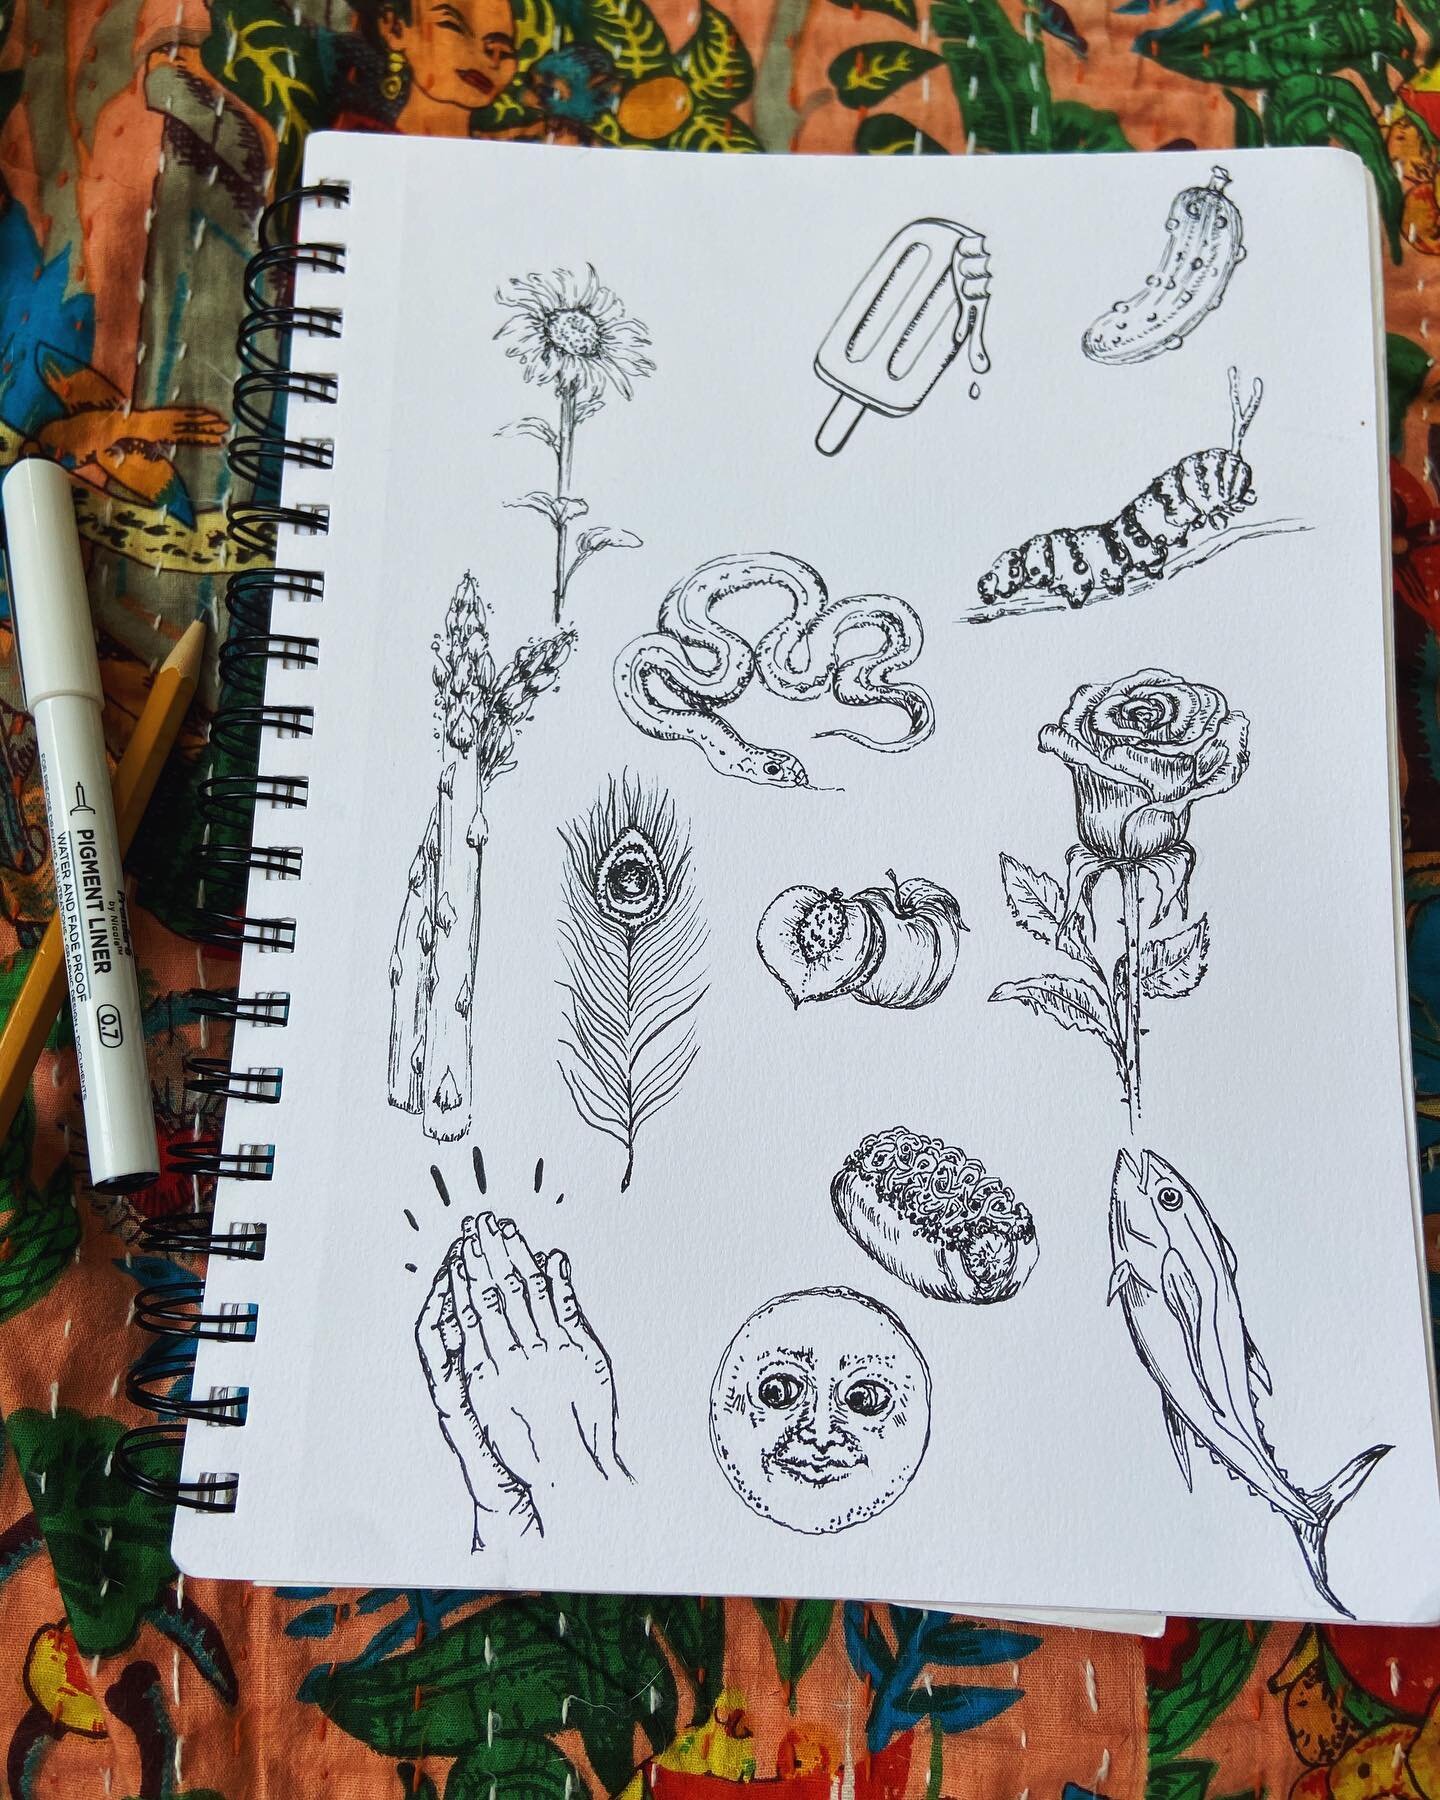 Took a day off from tufting to sketch out some of the suggestions you guys left me yesterday. Comment if you see ur idea &amp; if I got it right 🌝
.
.
.
.
.
.
.
.
.
.
#onlyblackink #onlyblacktattoos #inkdrawing #inkdrawings #inkdrawingart #micronpen